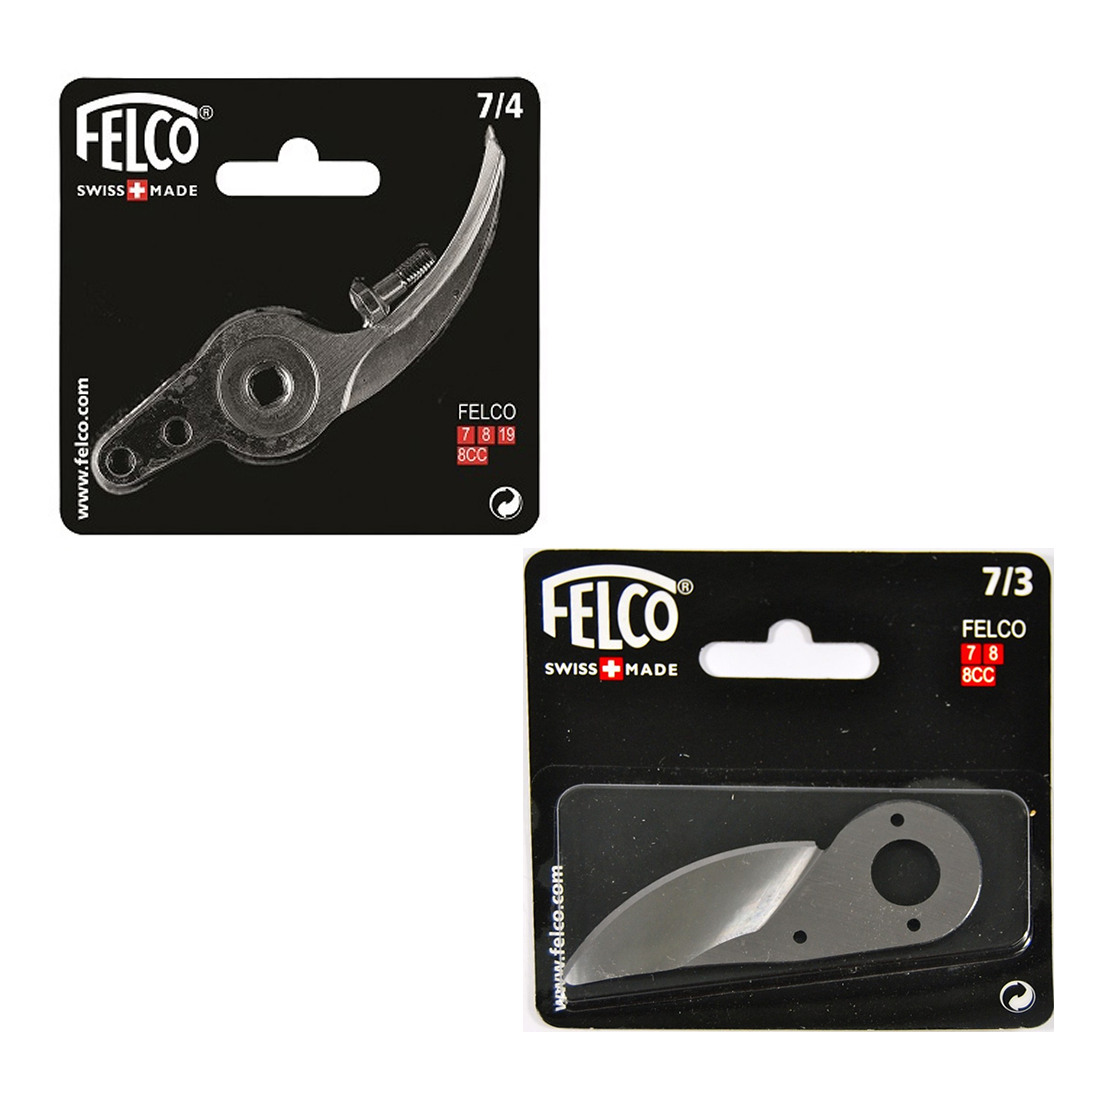 Felco model 7 secateurs blade and Anvil set - for model 7 and 8 - new and sealed - official Felco stockist